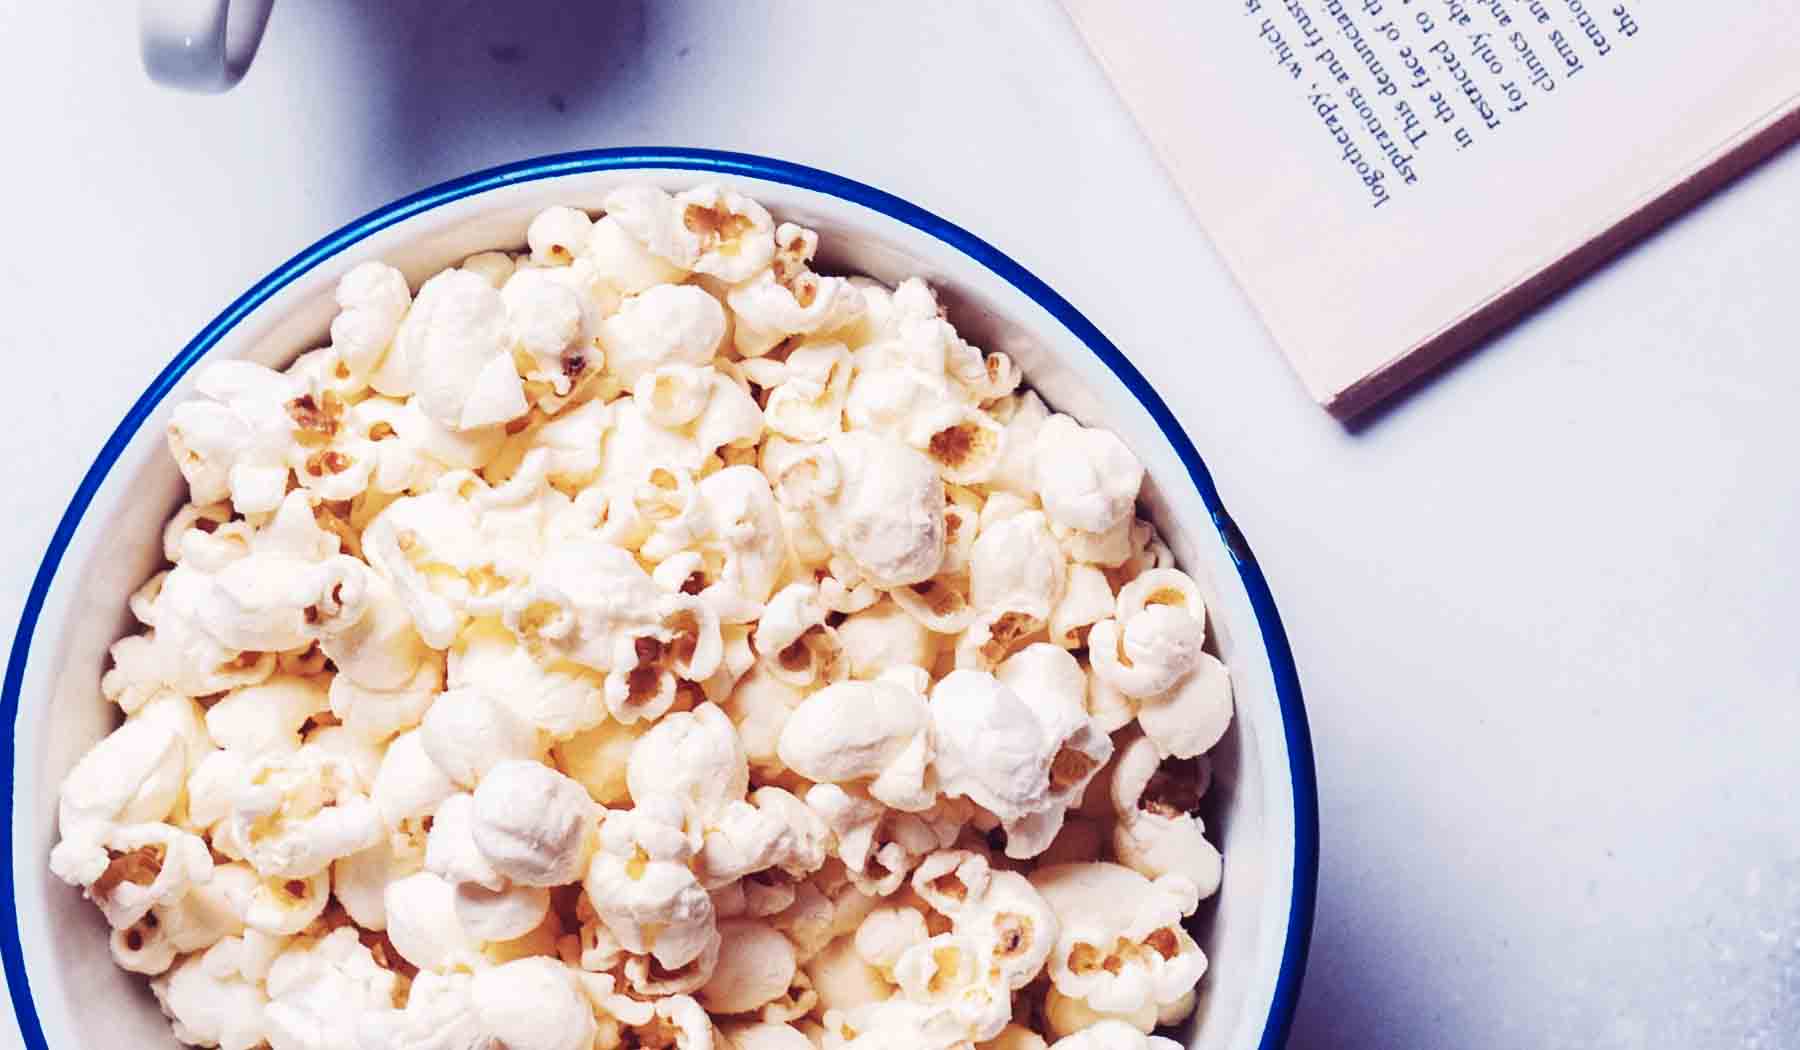 snacks to eat while reading books